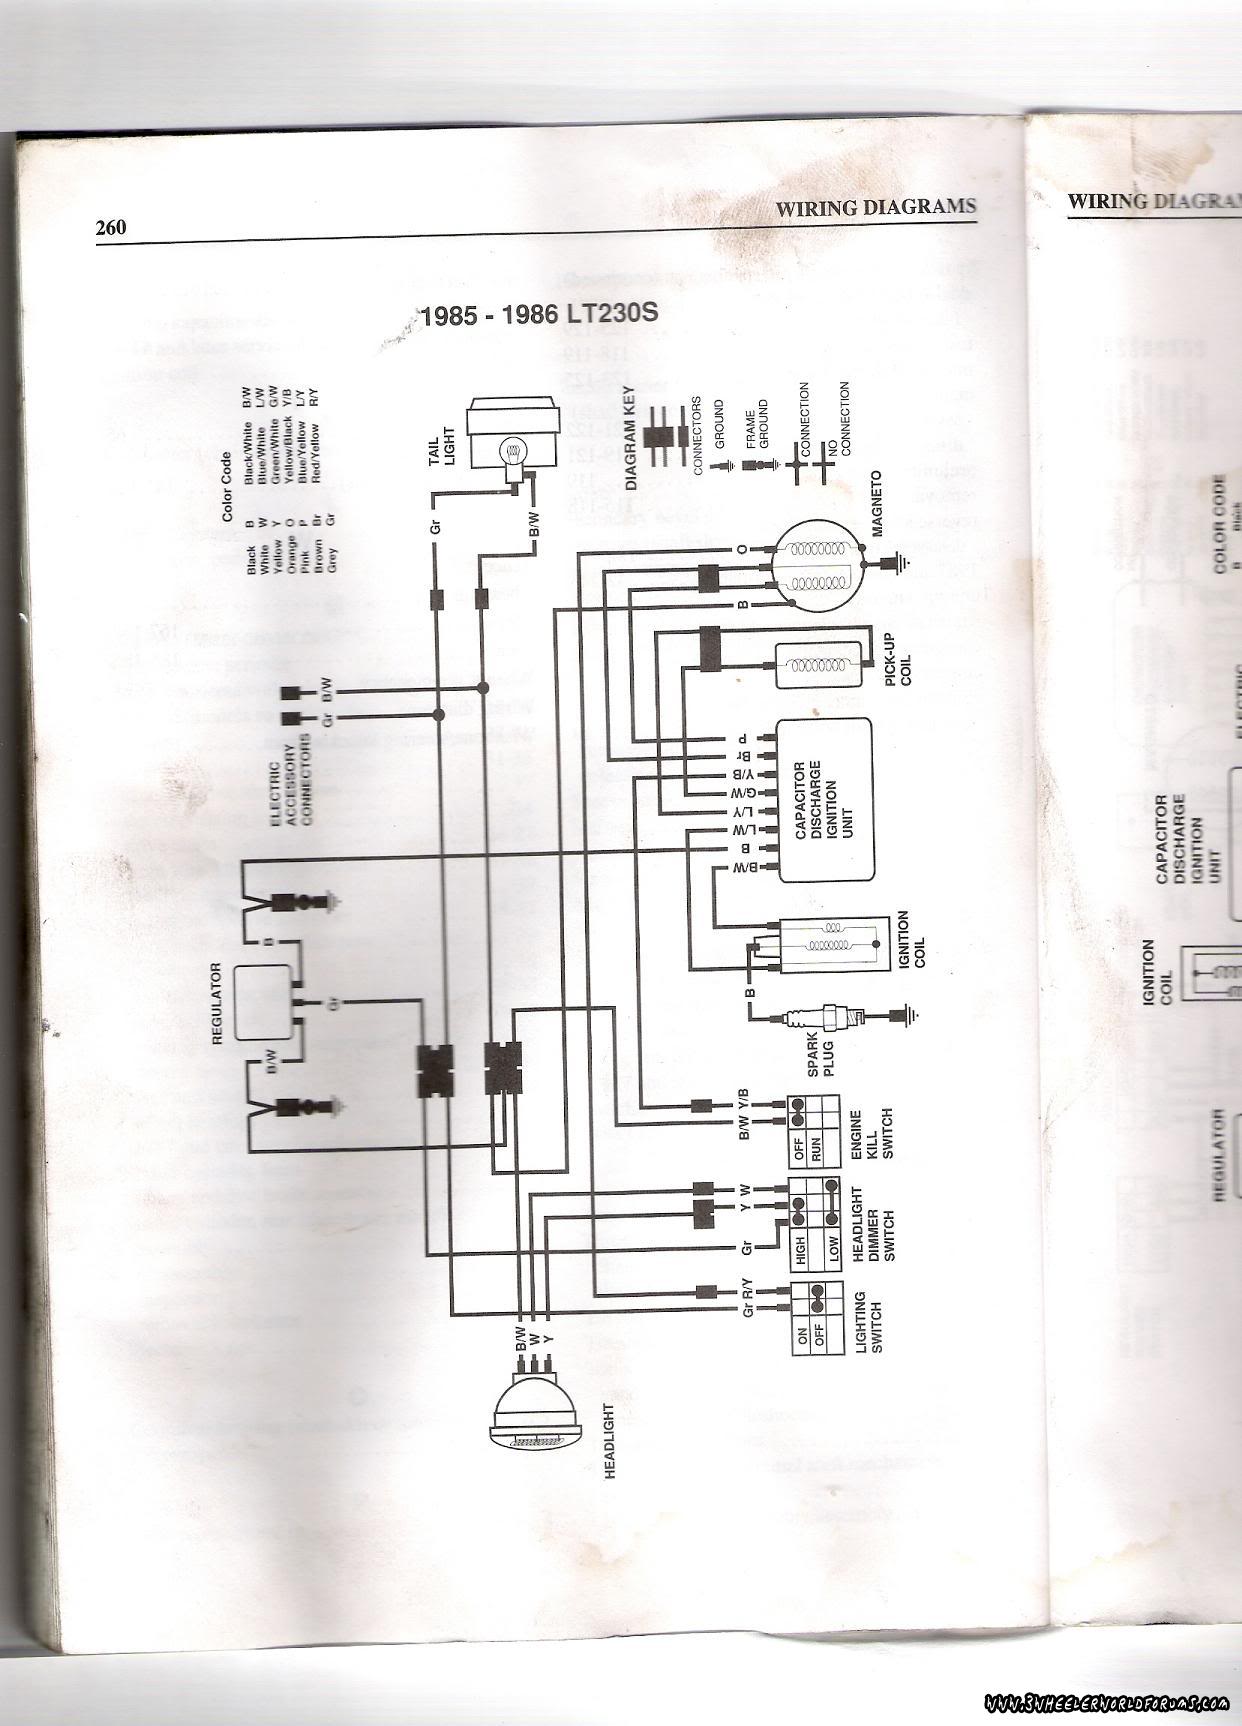 Wiring Diagram For 87 Lt80 Suzuki from atvconnection.com